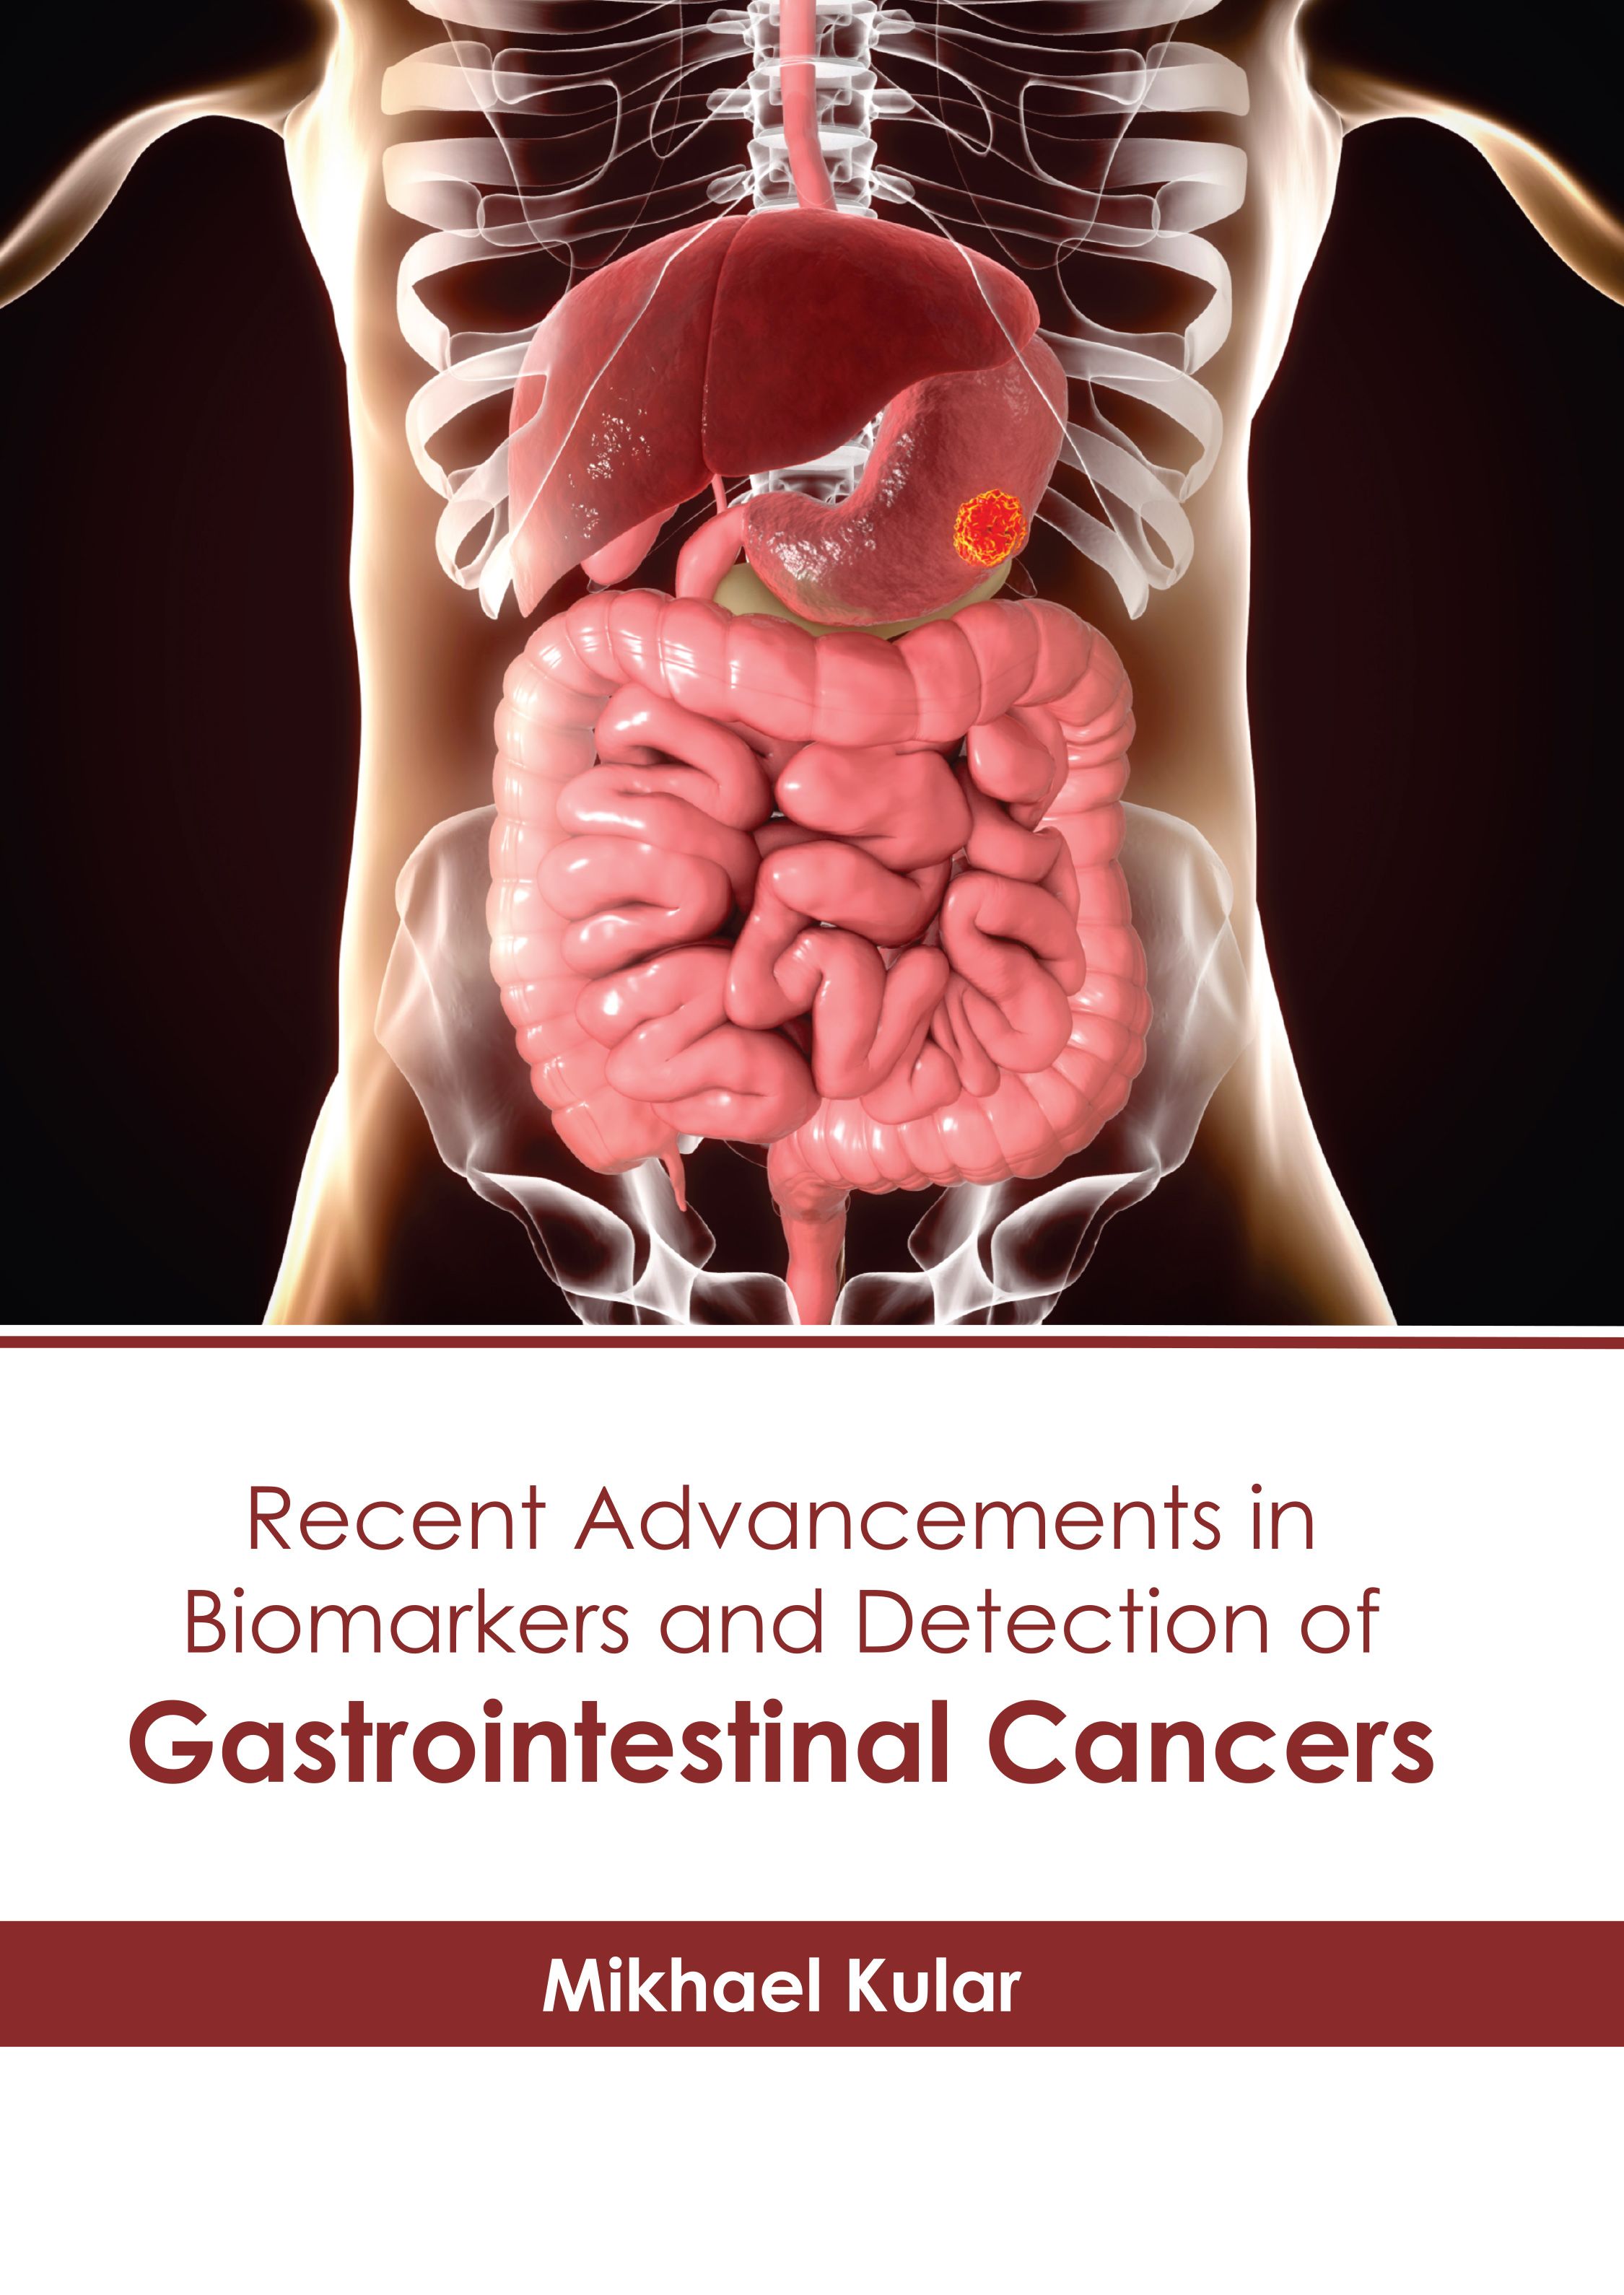 RECENT ADVANCEMENTS IN BIOMARKERS AND DETECTION OF GASTROINTESTINAL CANCERS